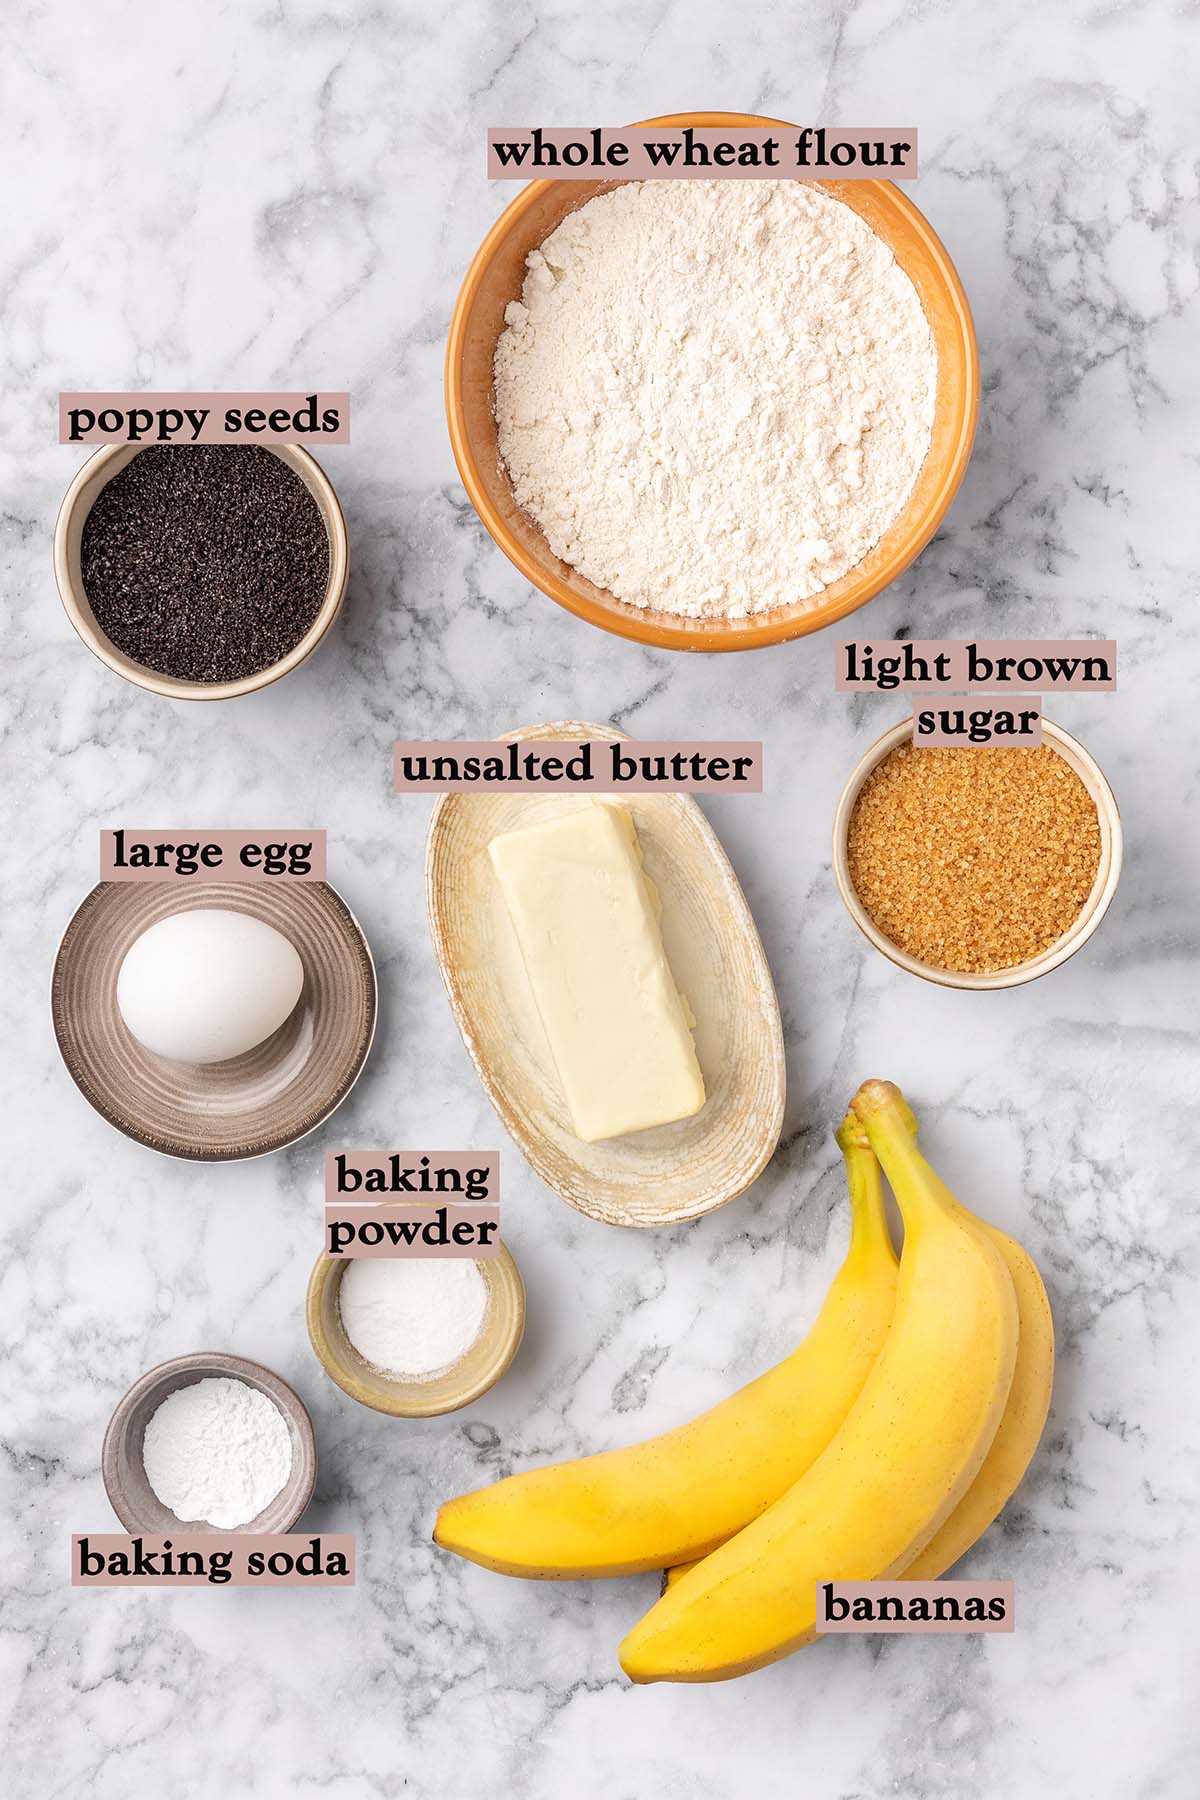 Ingredients for Banana Poppy Seed Muffins